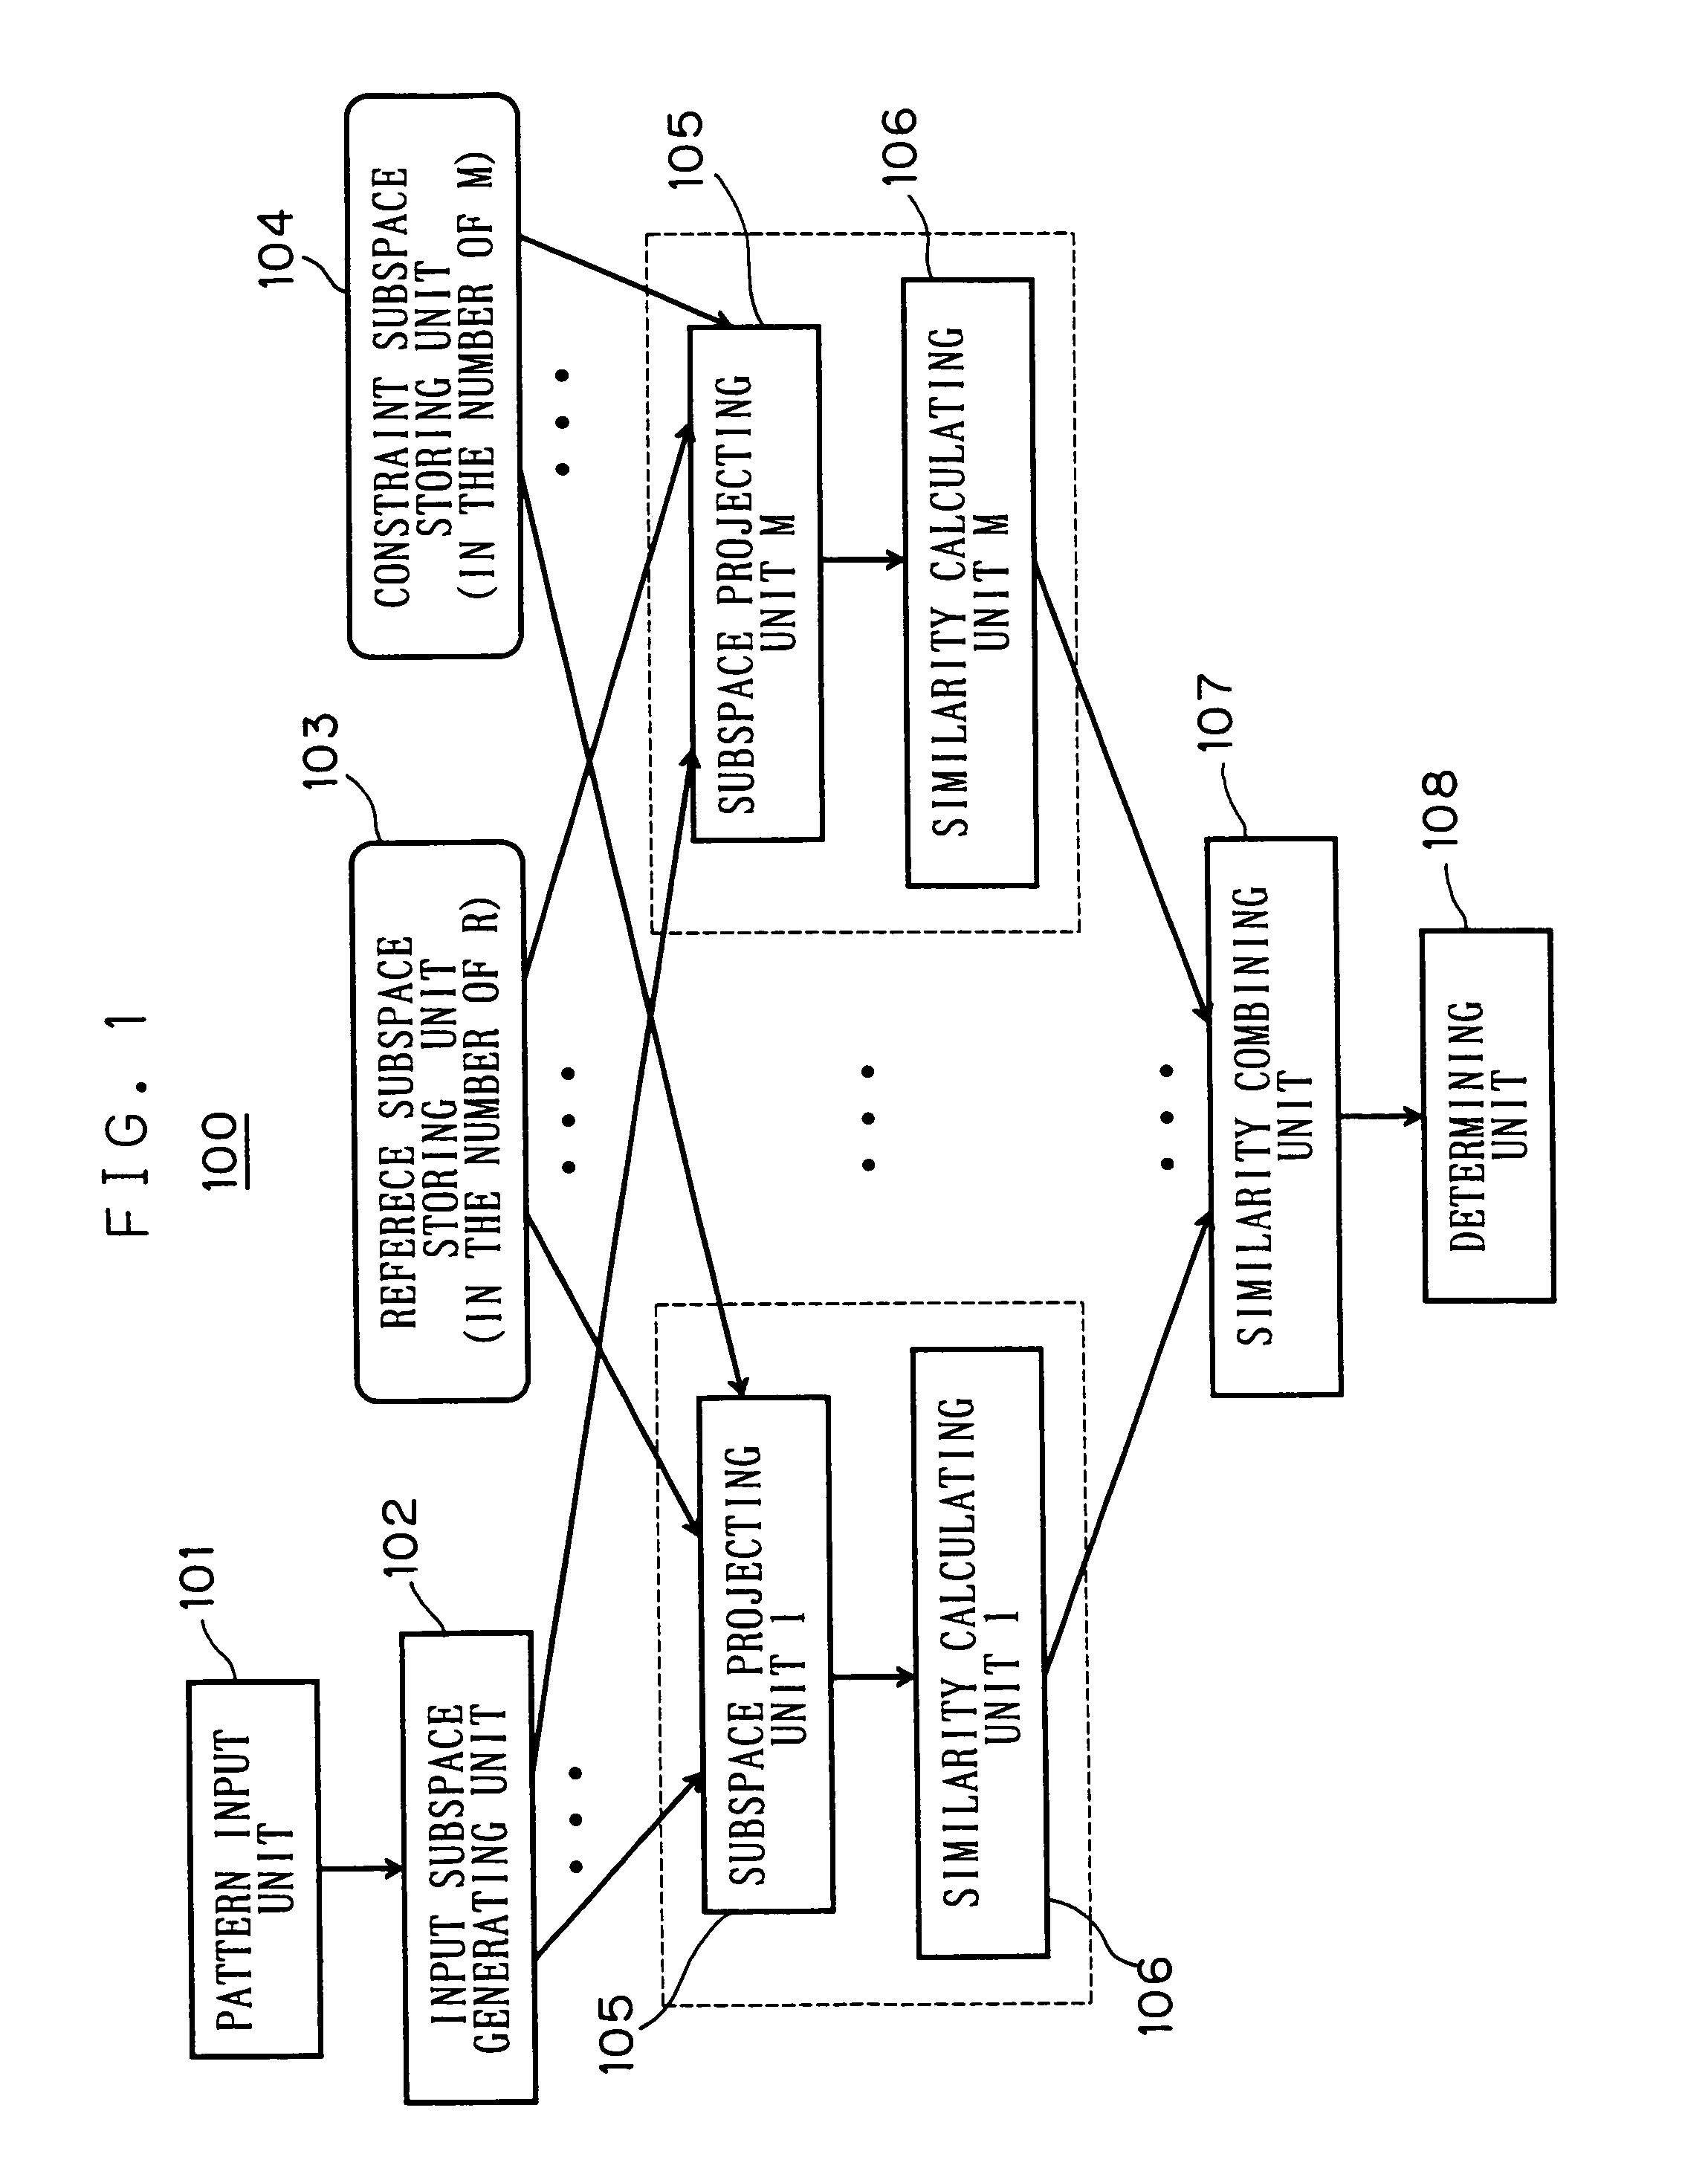 Apparatus and method of pattern recognition